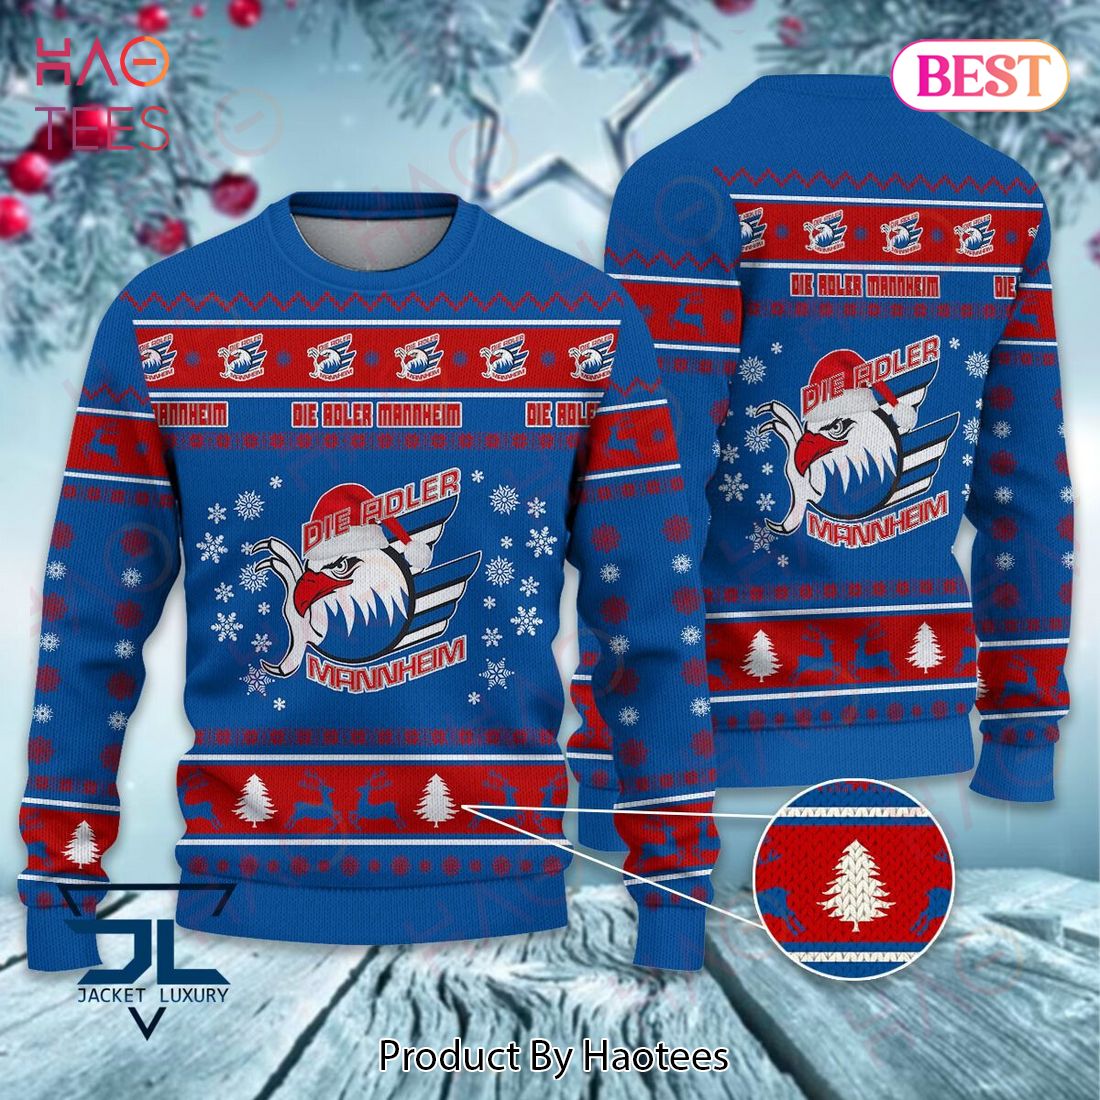 Adler Mannheim Blue Mix Red Christmas Luxury Brand Sweater Limited Edition